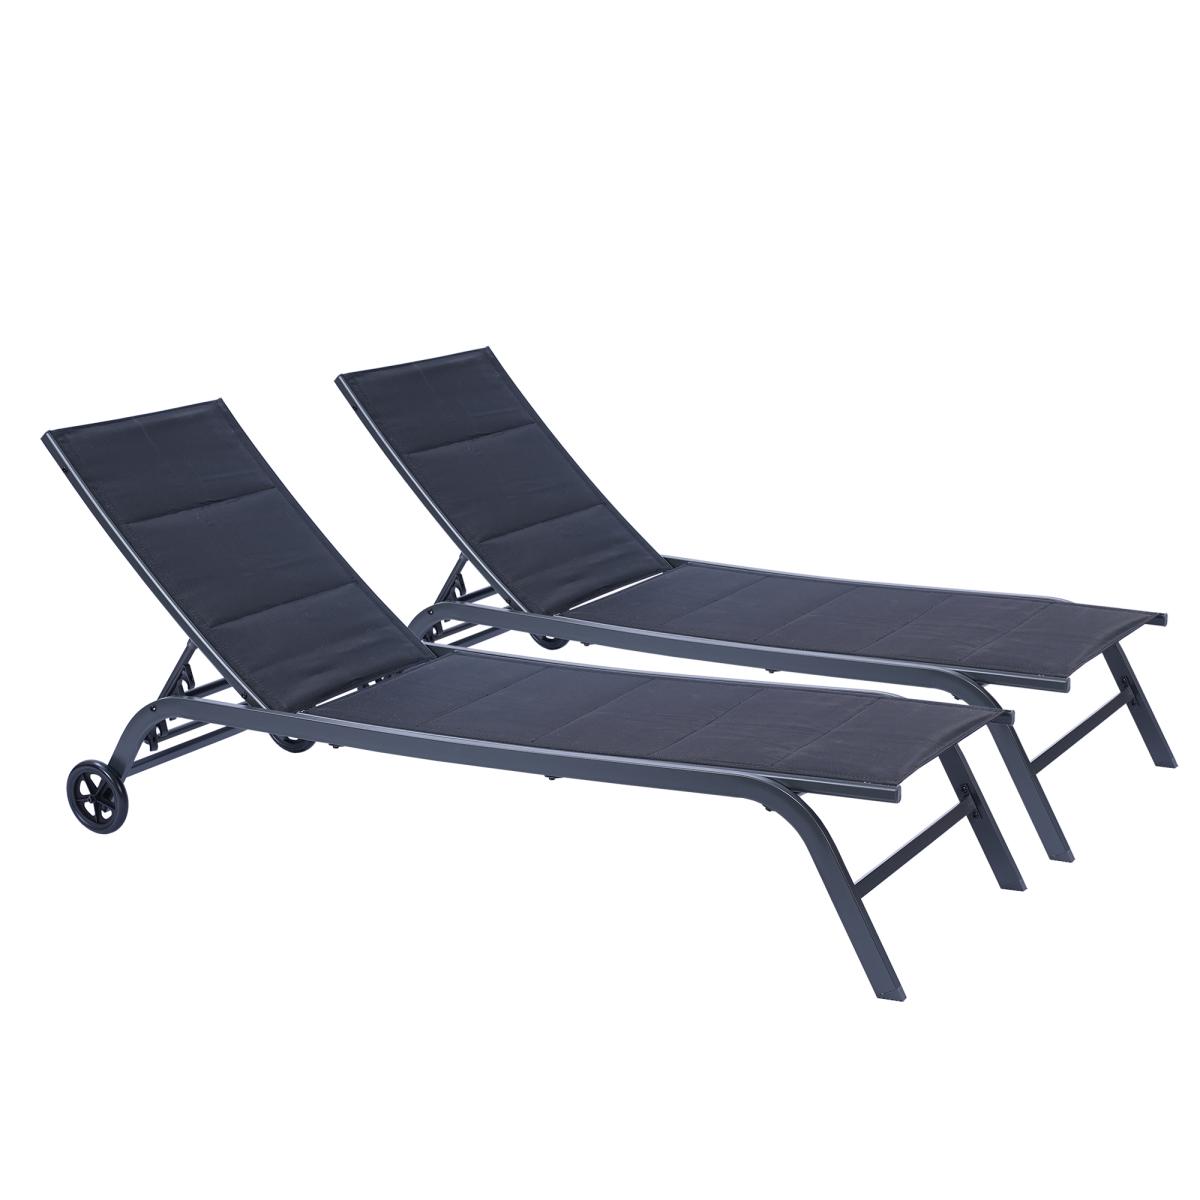 2-Piece Set Outdoor Patio Chaise Lounge Chair, Five-Position Adjustable Metal Recliner, All Weather For Patio,Beach,Yard, Pool